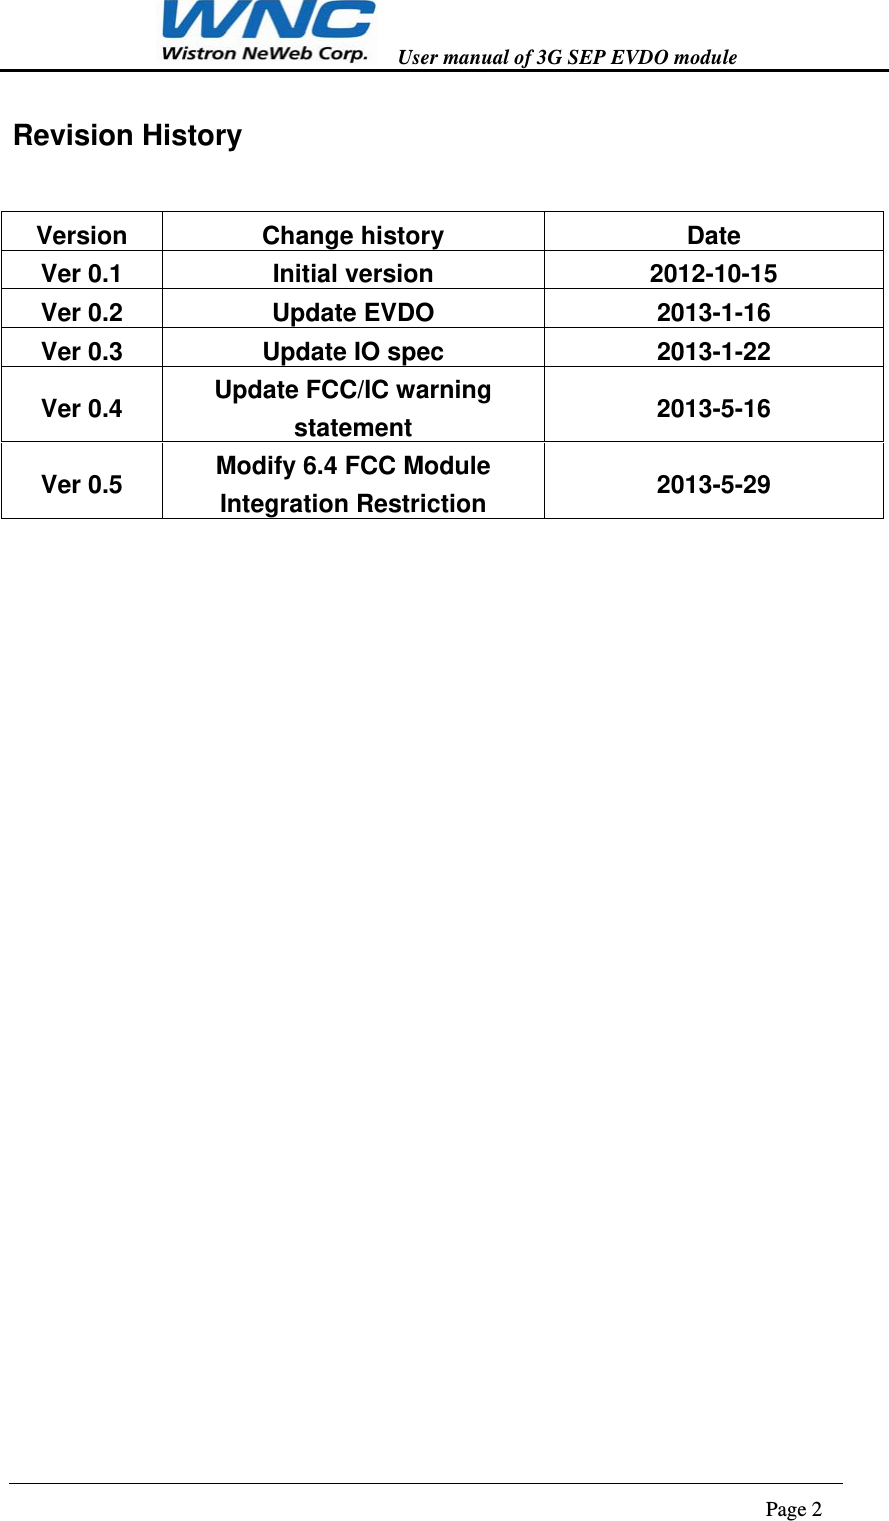   User manual of 3G SEP EVDO module                                                                      Page 2  Revision History  Version Change history  Date Ver 0.1  Initial version  2012-10-15 Ver 0.2  Update EVDO  2013-1-16 Ver 0.3  Update IO spec  2013-1-22 Ver 0.4  Update FCC/IC warning statement  2013-5-16 Ver 0.5  Modify 6.4 FCC Module Integration Restriction  2013-5-29                            